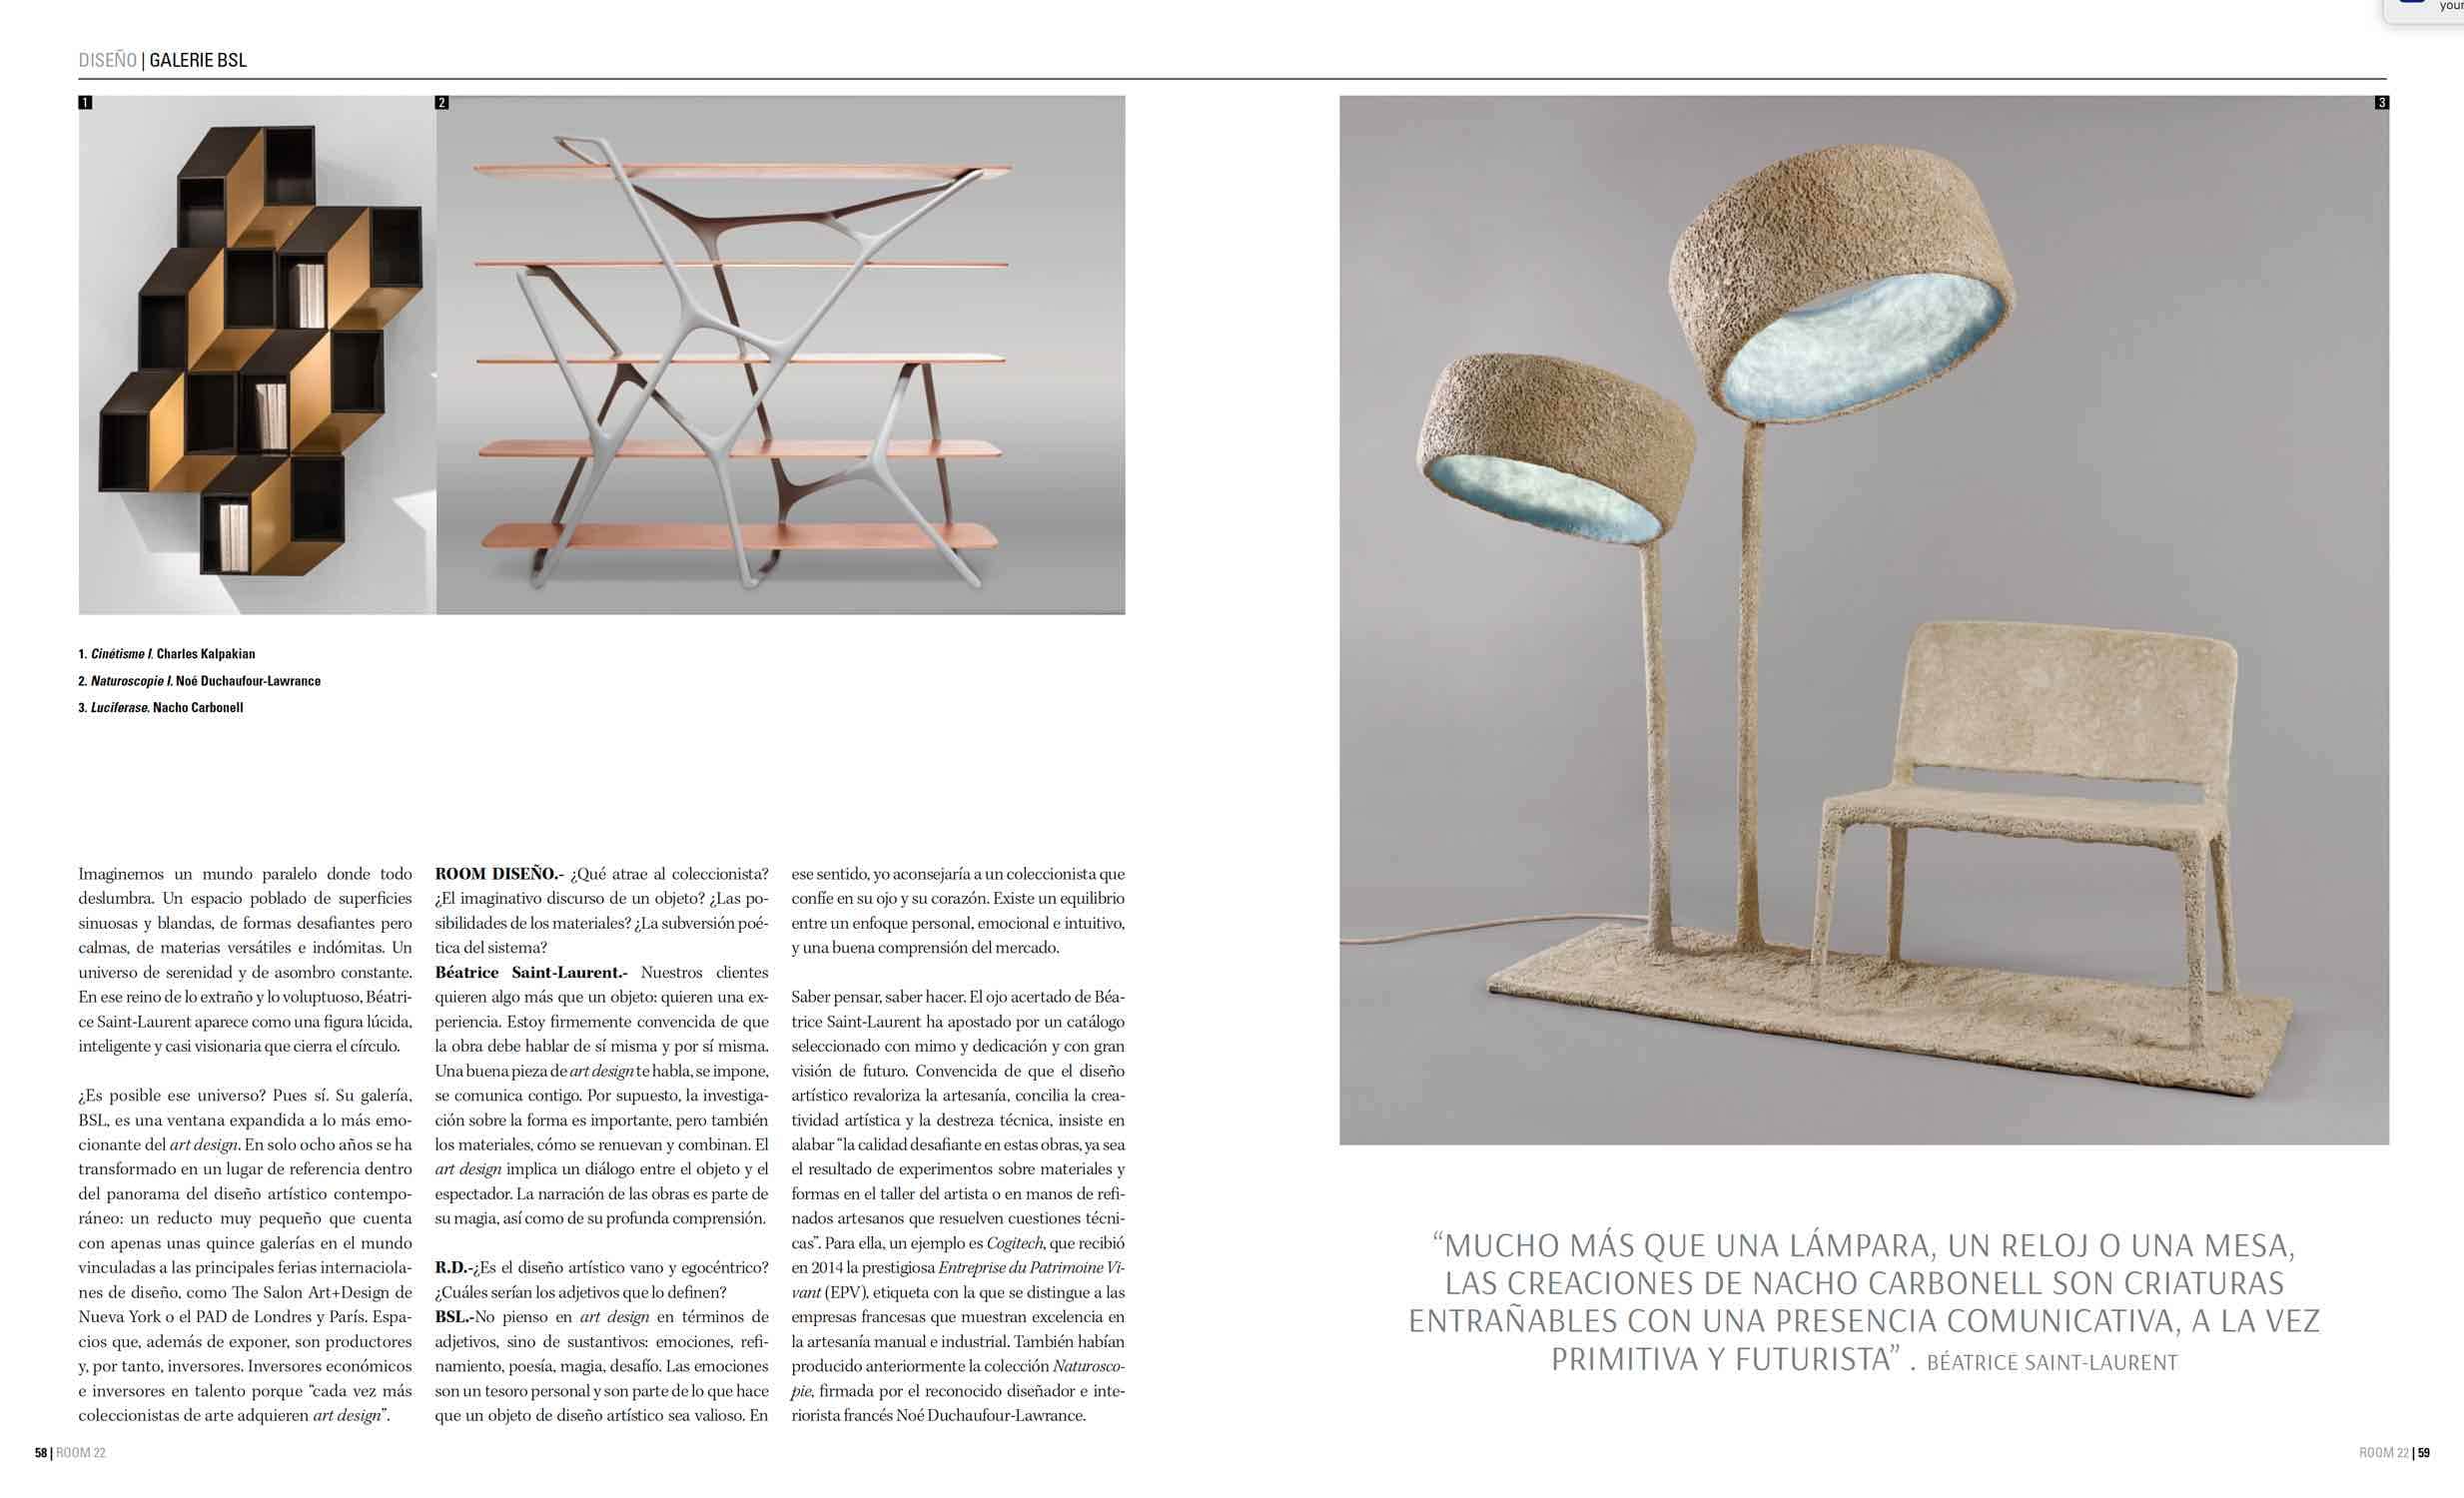 Room #22 published on February 2020 featuring an article on Galerie BSL with CE15 Ombre Chair by Carol Egan, page 62.